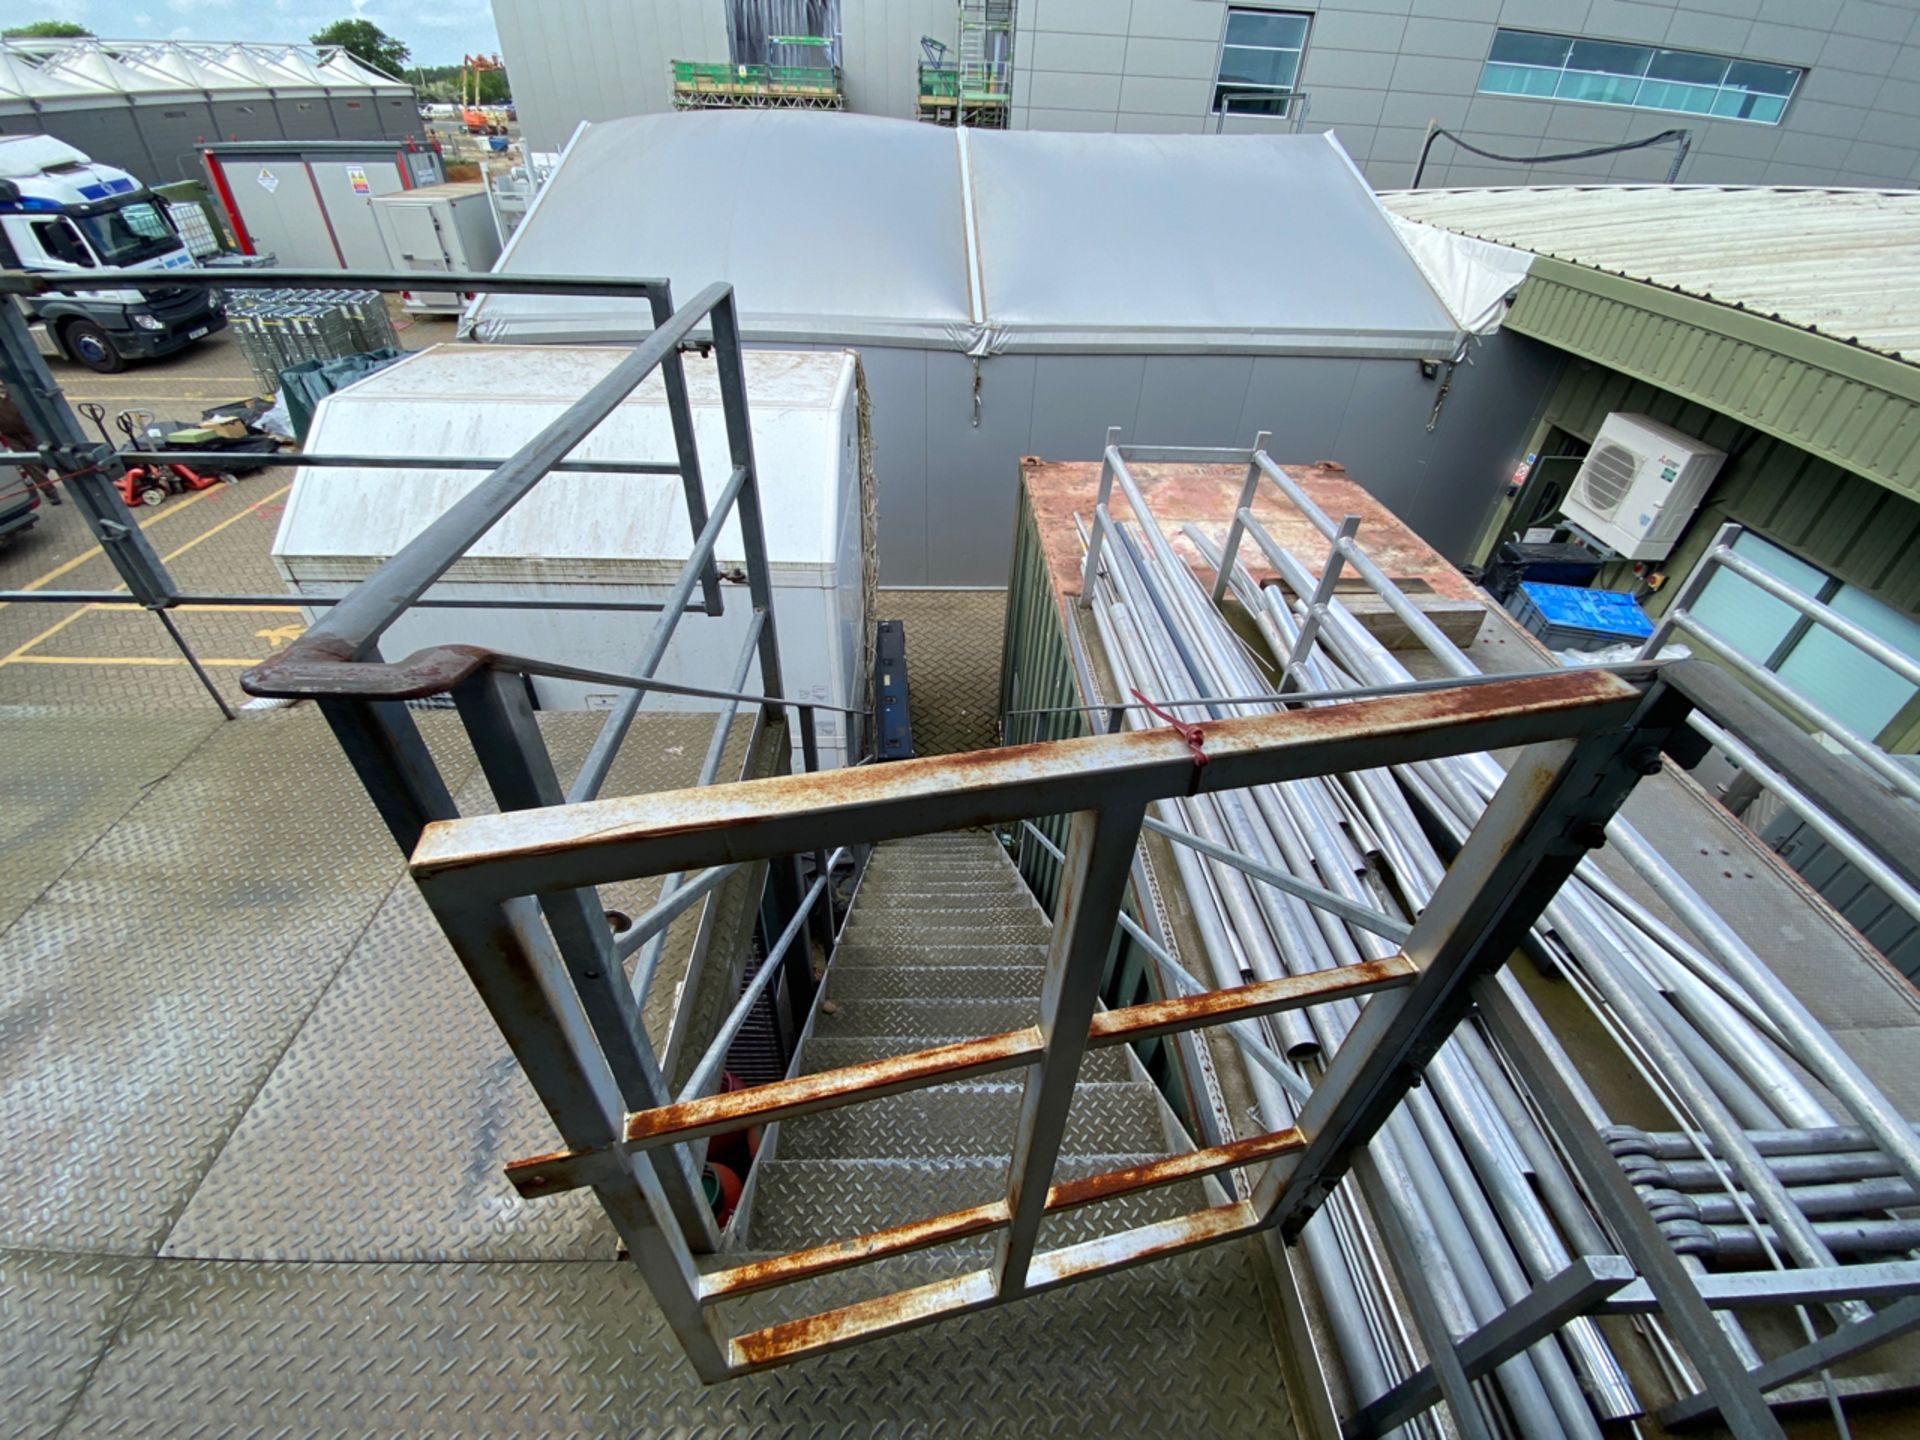 Loading Platform with Staircase - Image 8 of 10